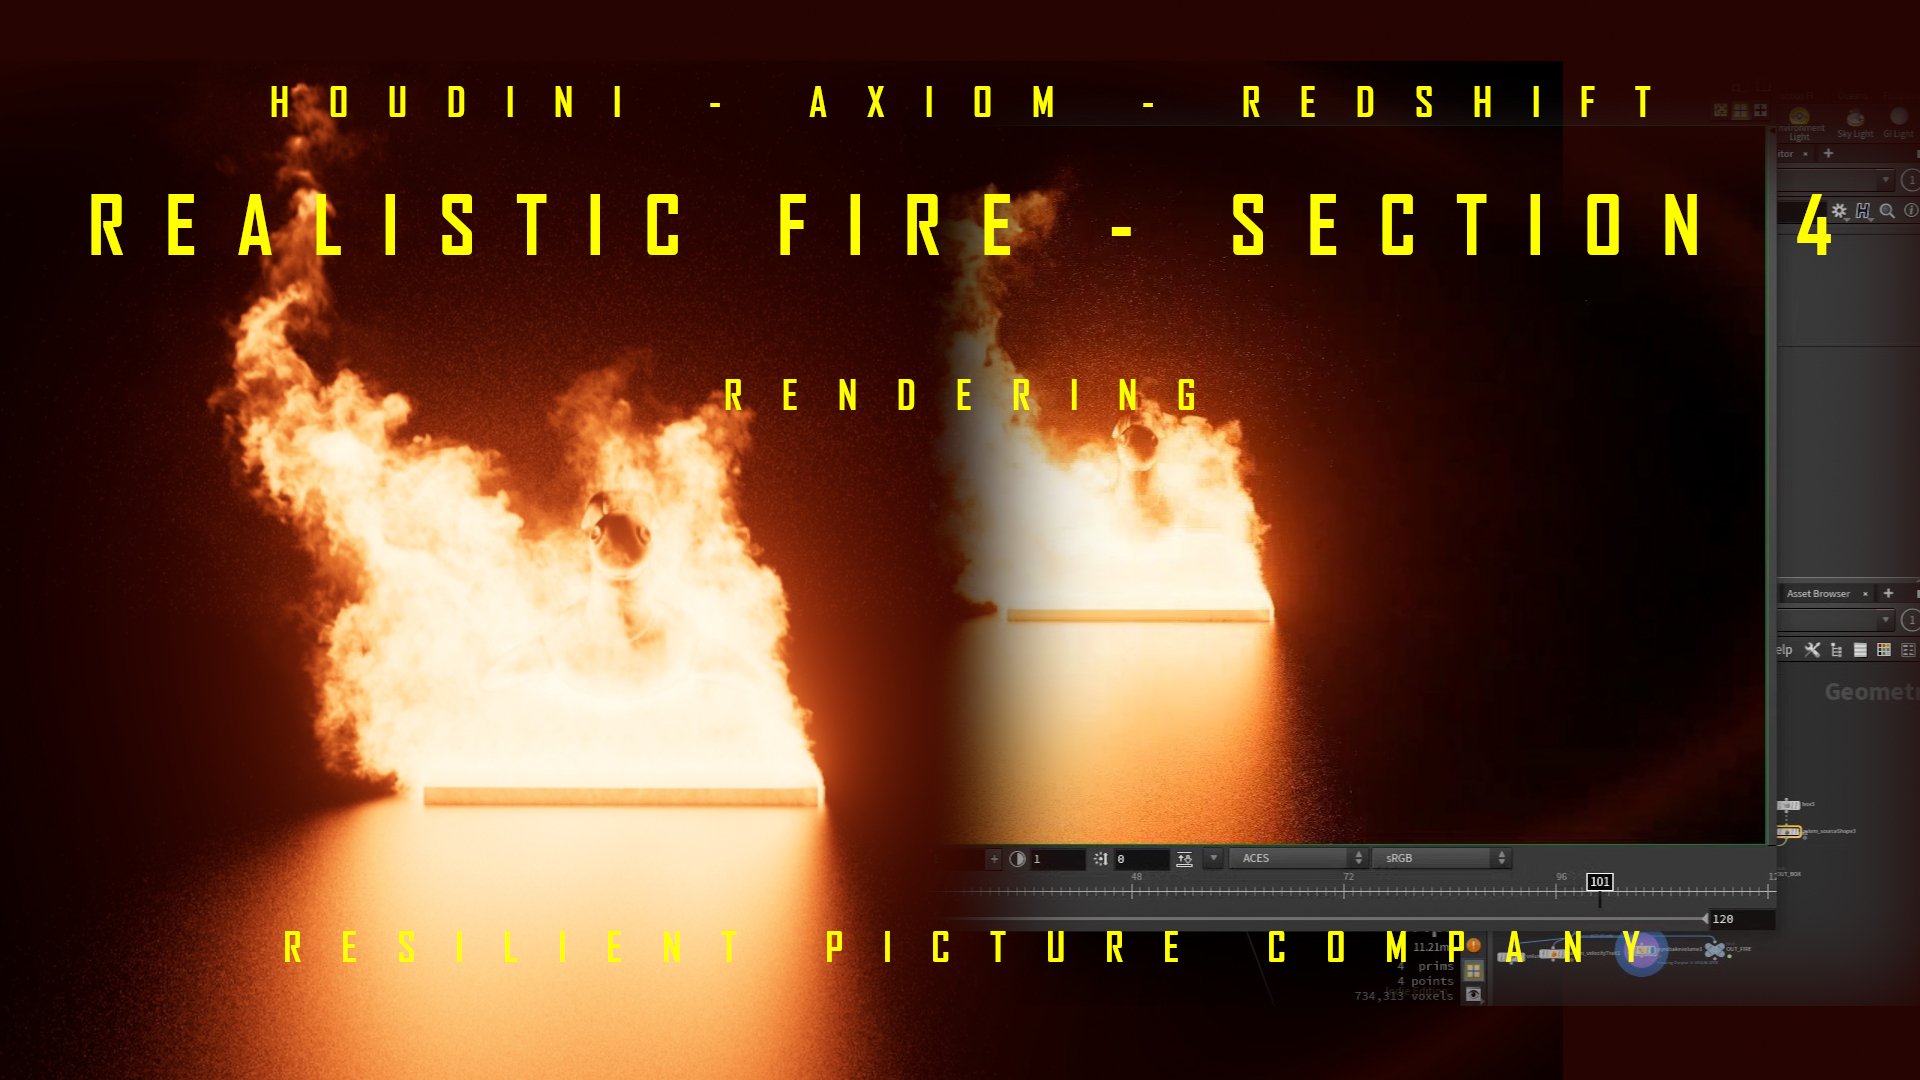 REALISTIC FIRE - SECTION 4